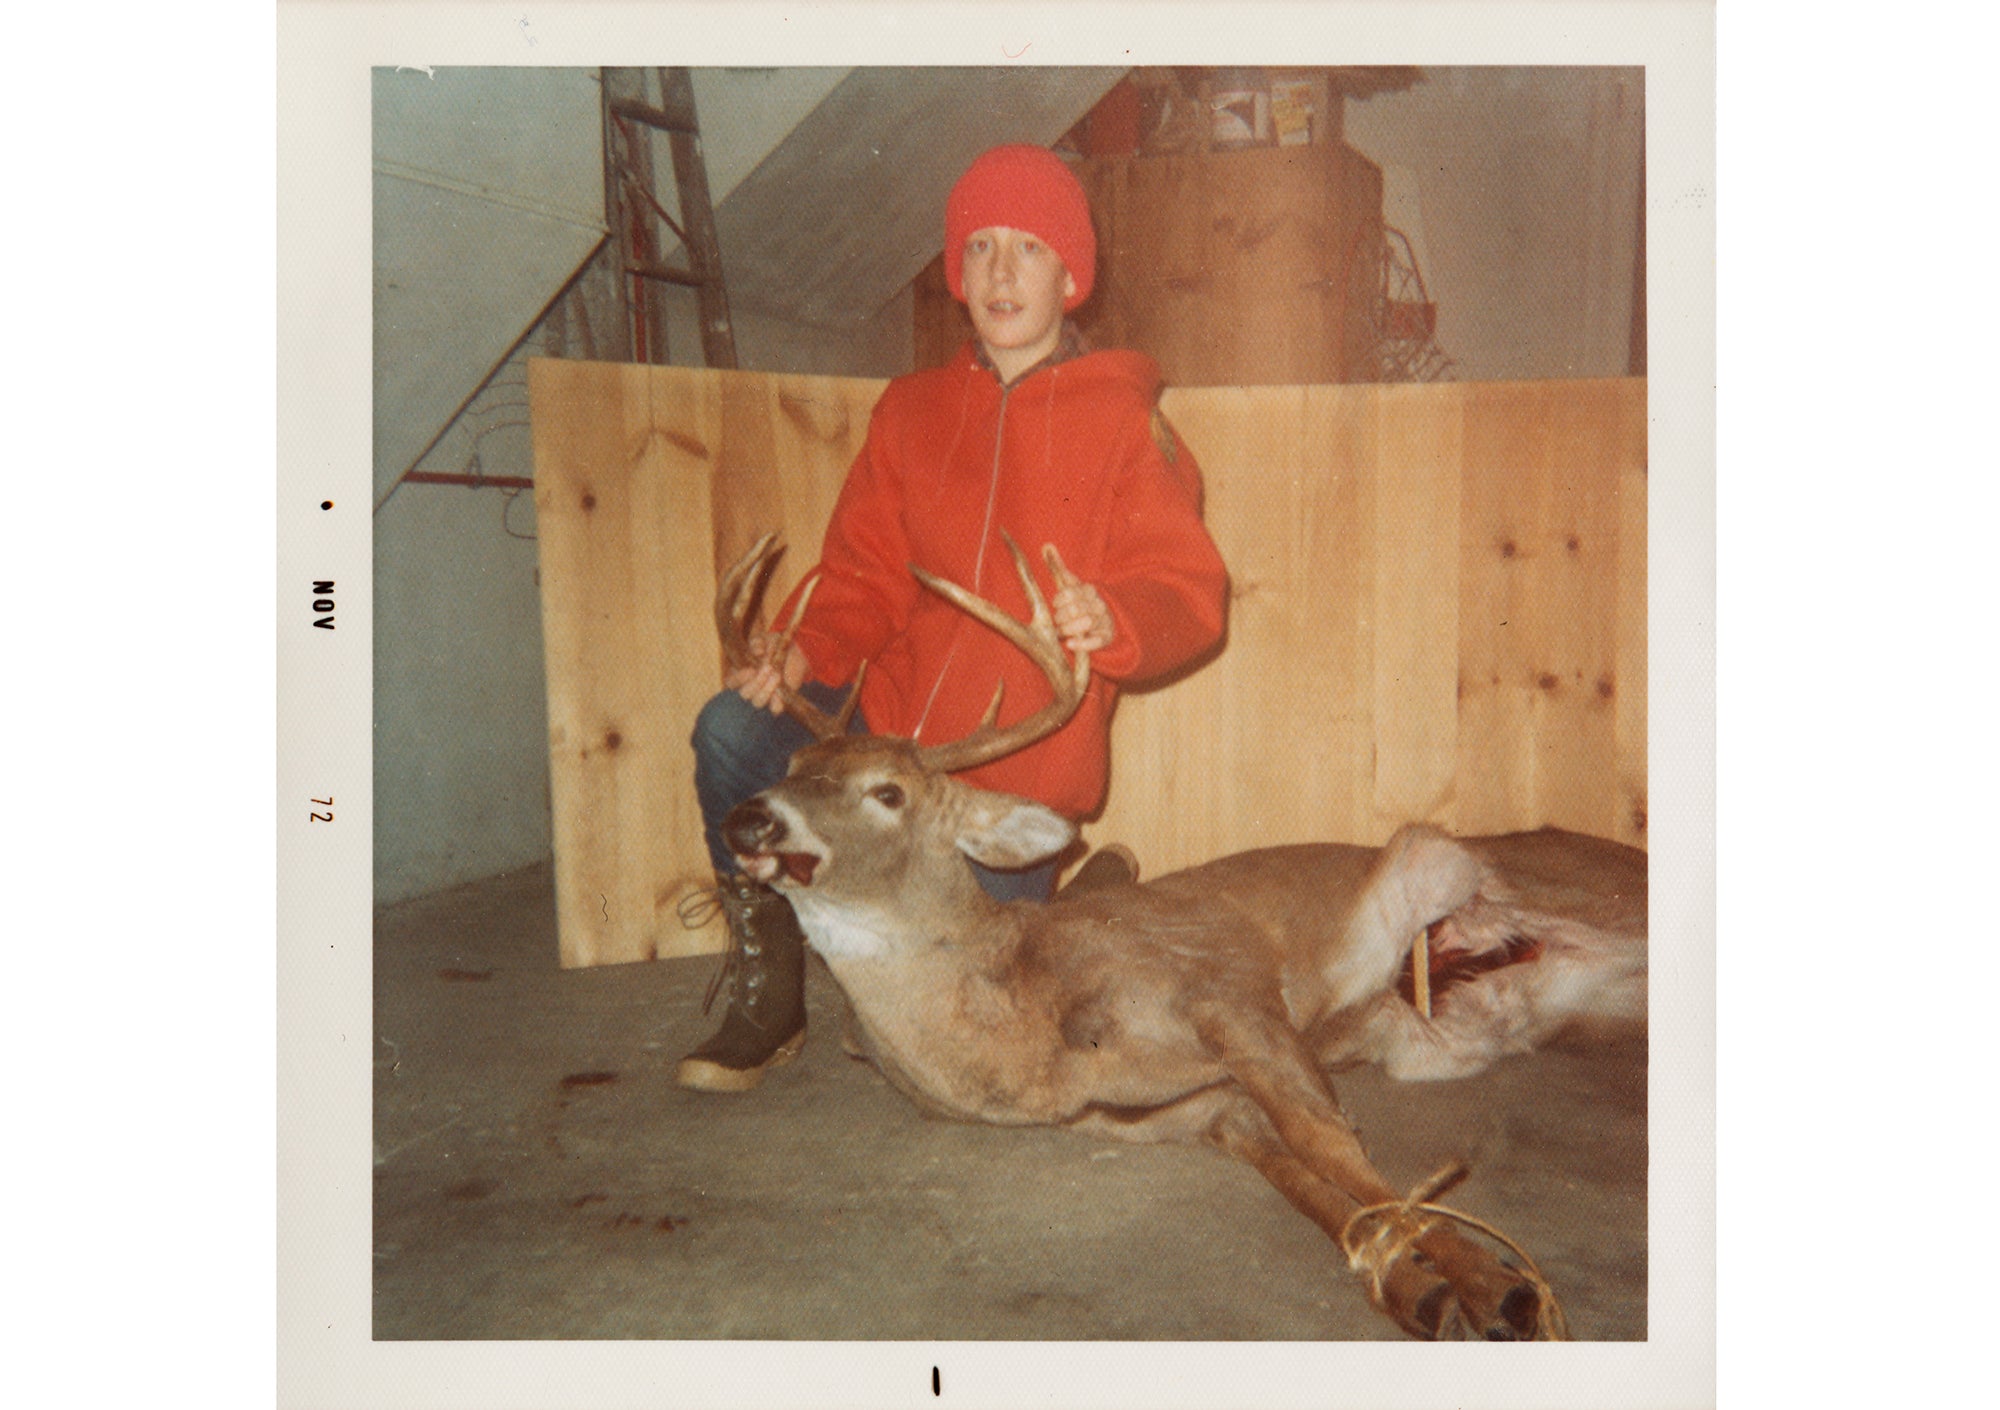 Young Bestul holds up buck's antlers